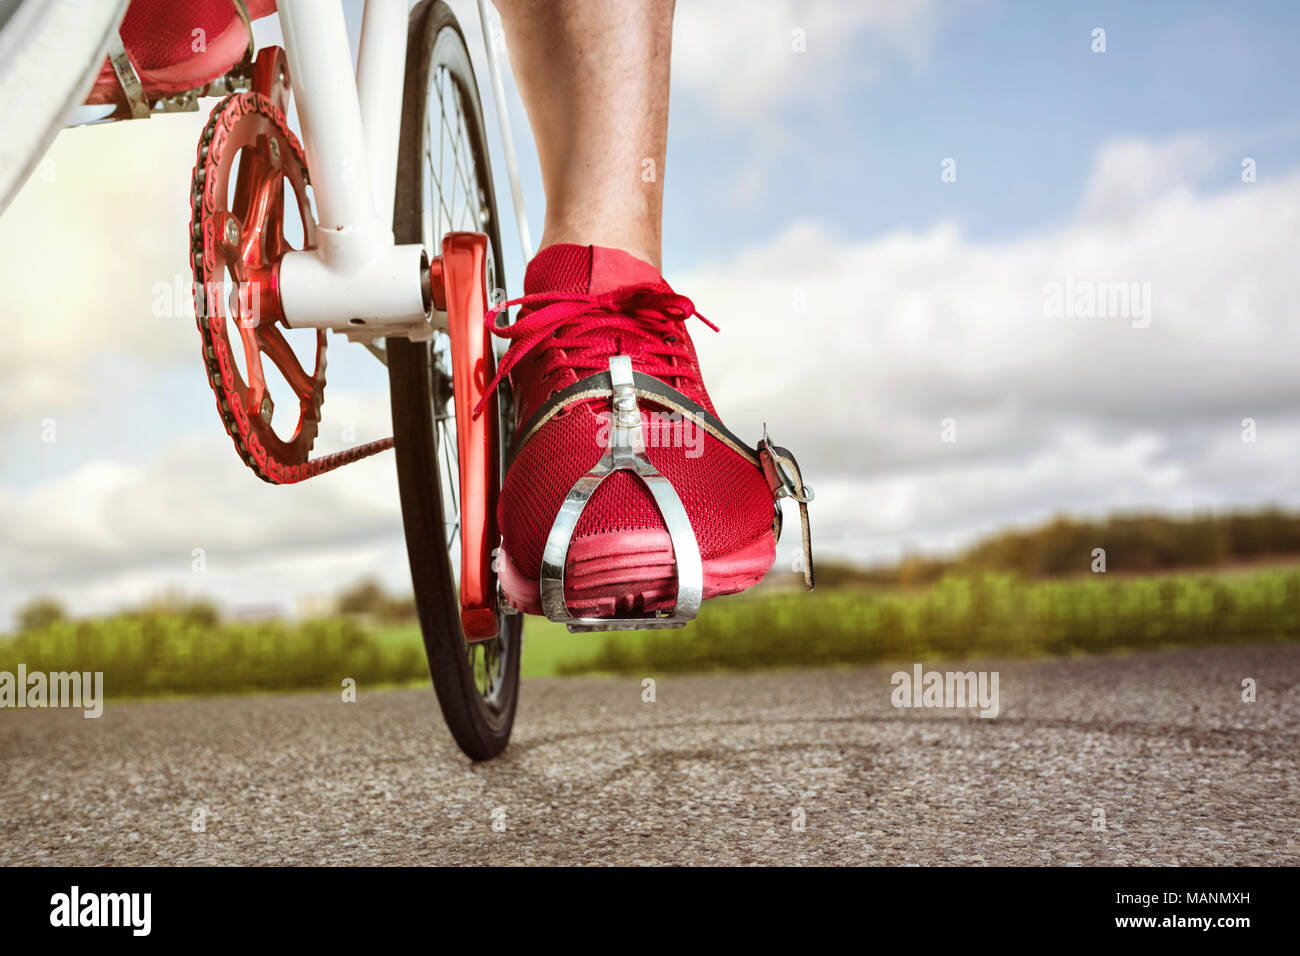 Foot On Bike Pedal Stock Photos - 3,228 Images